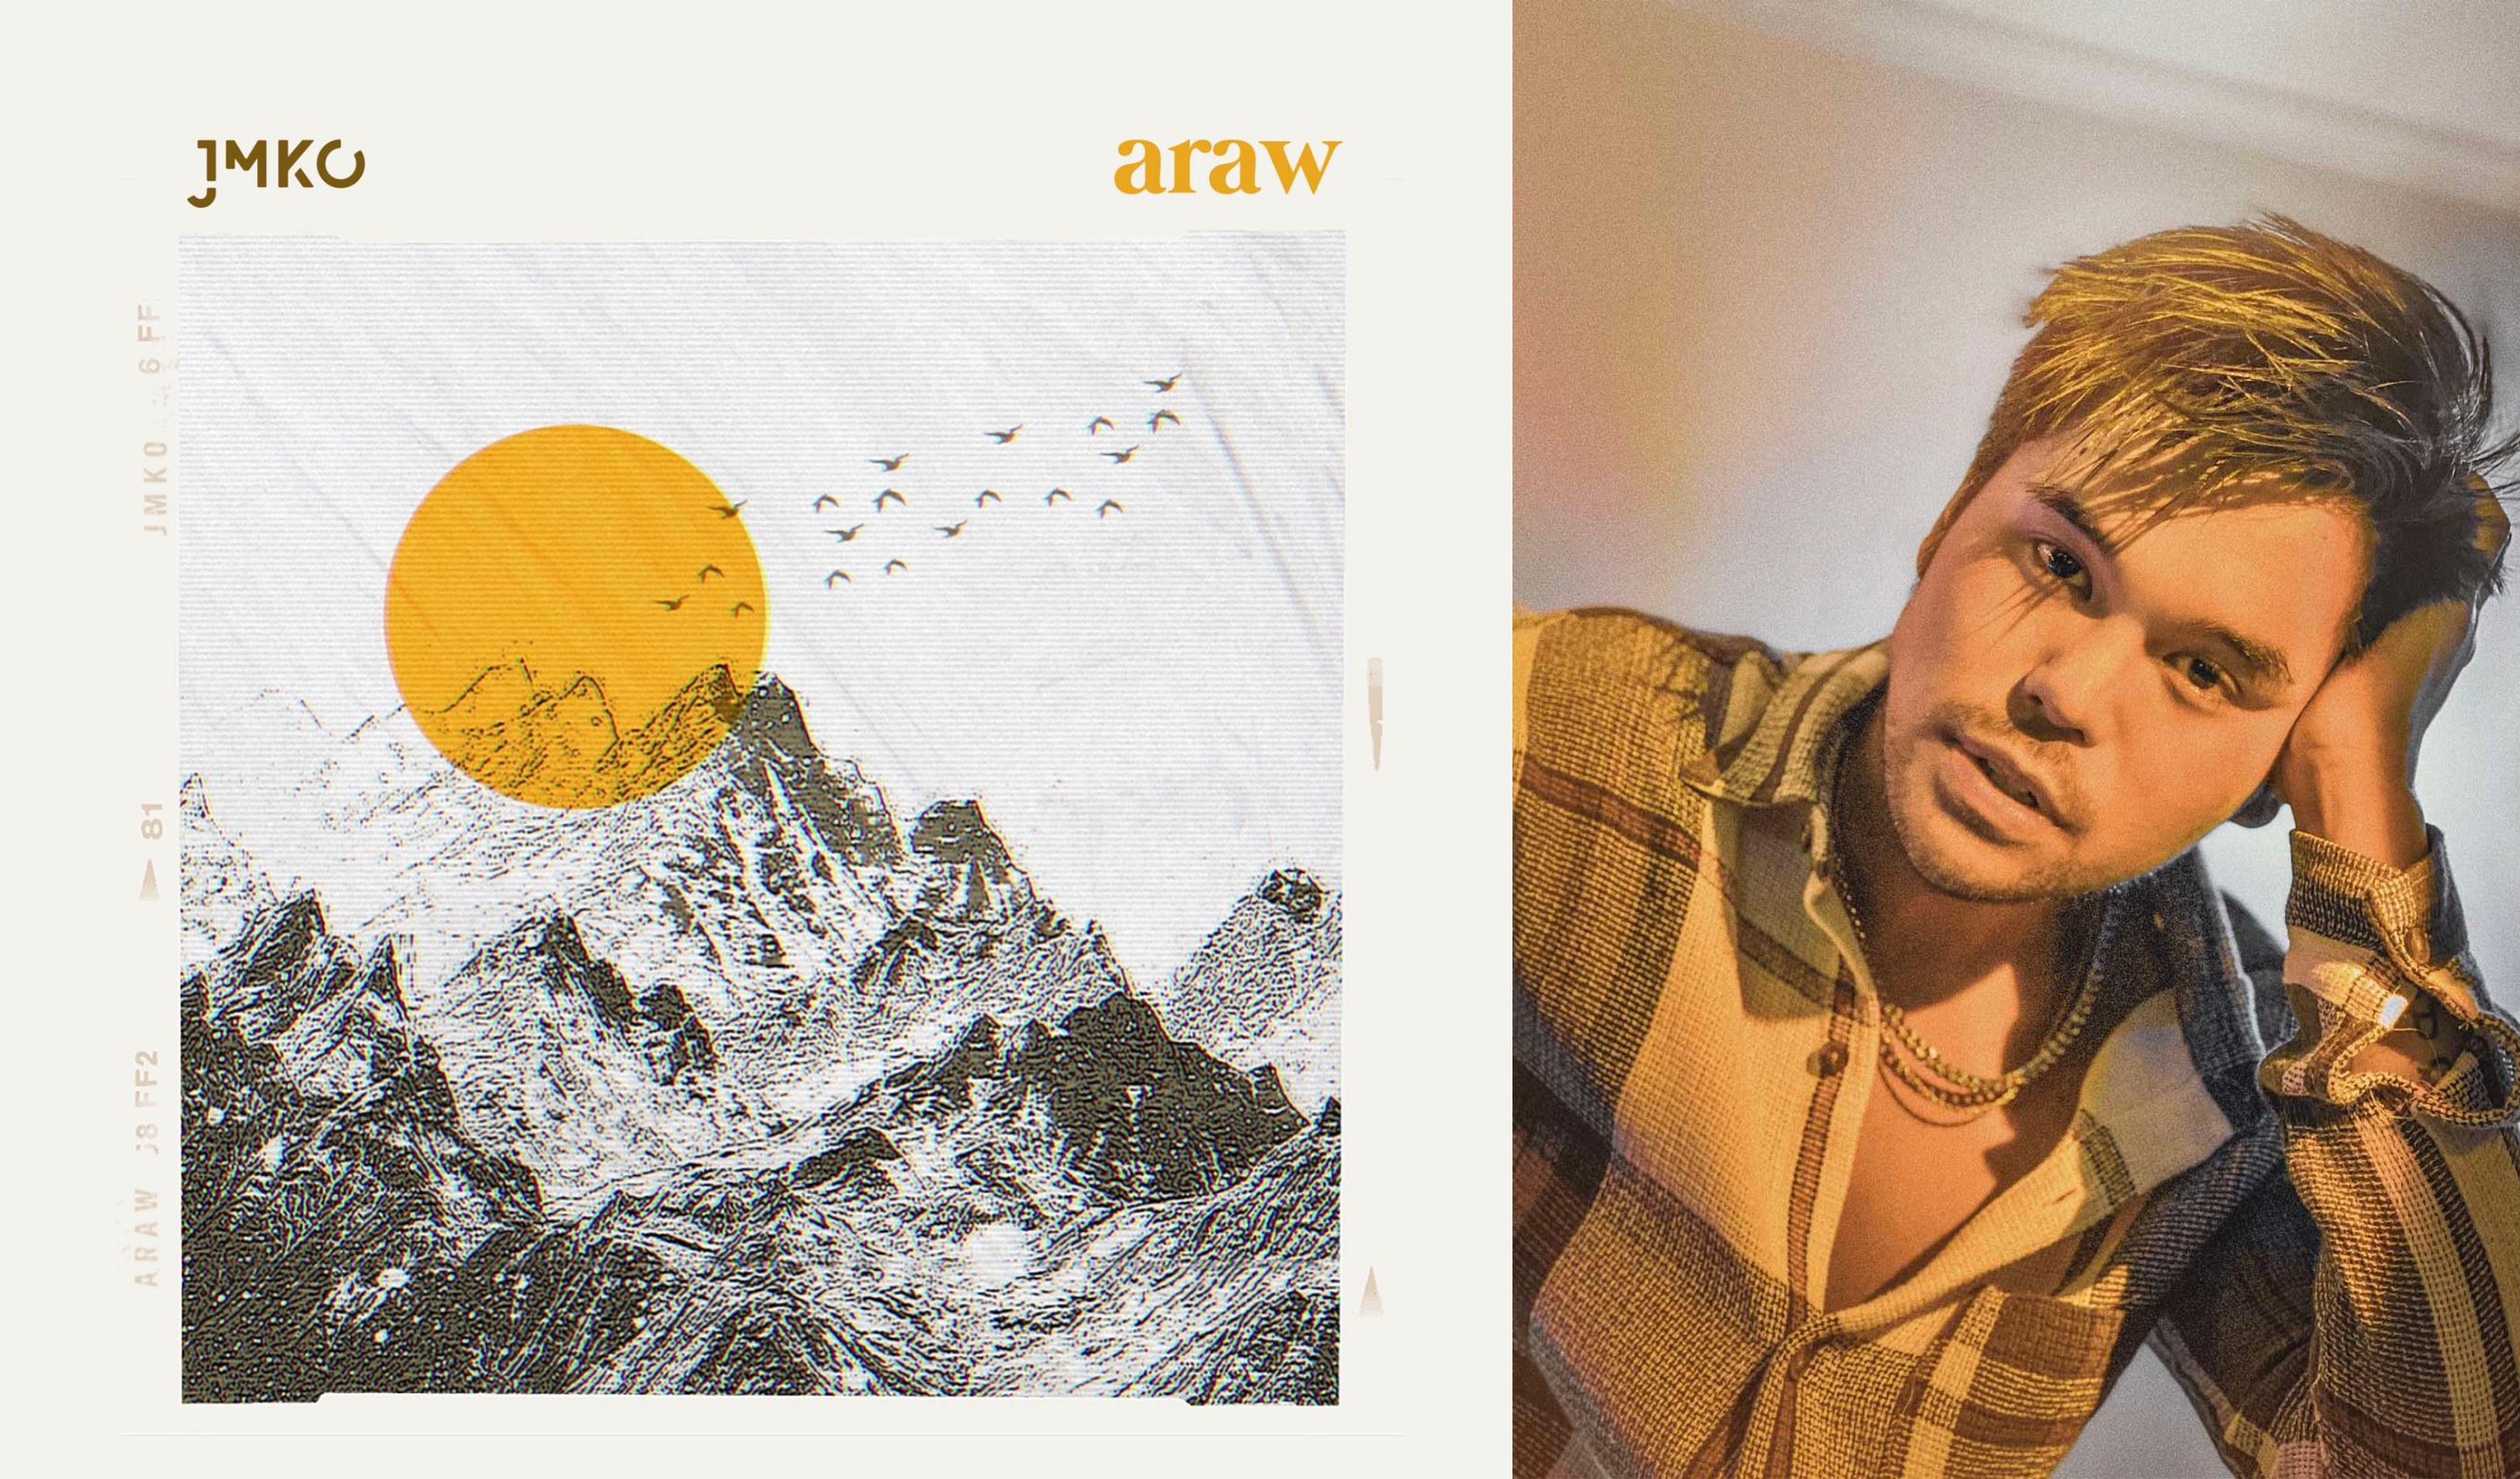 JMKO rises above a one-sided love in "Araw" single